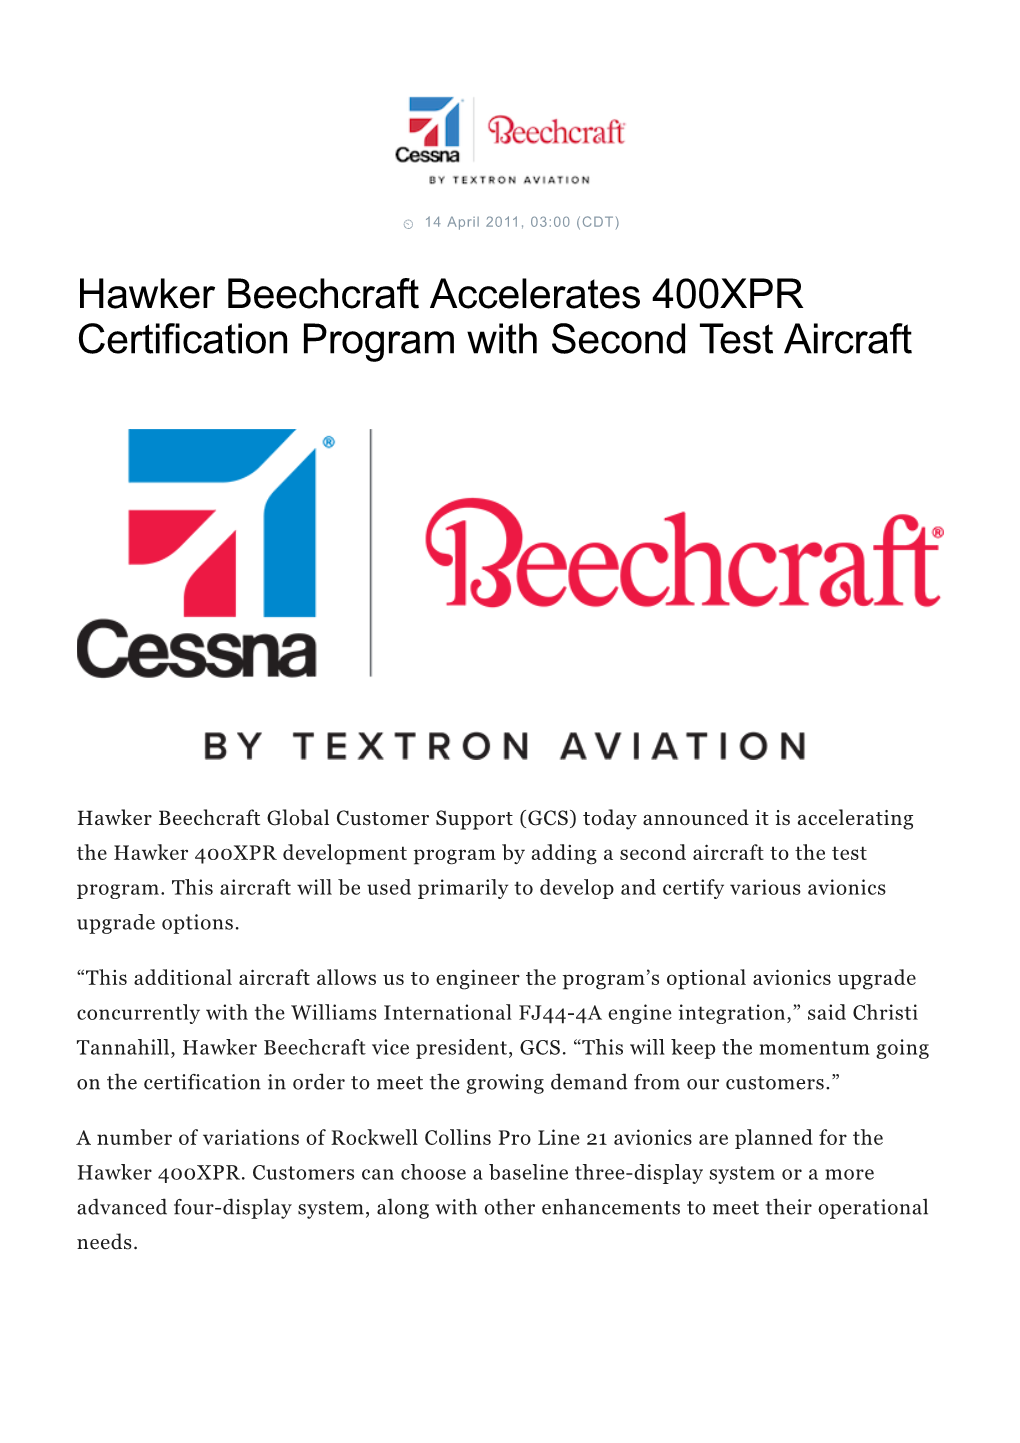 Hawker Beechcraft Accelerates 400XPR Certification Program with Second Test Aircraft